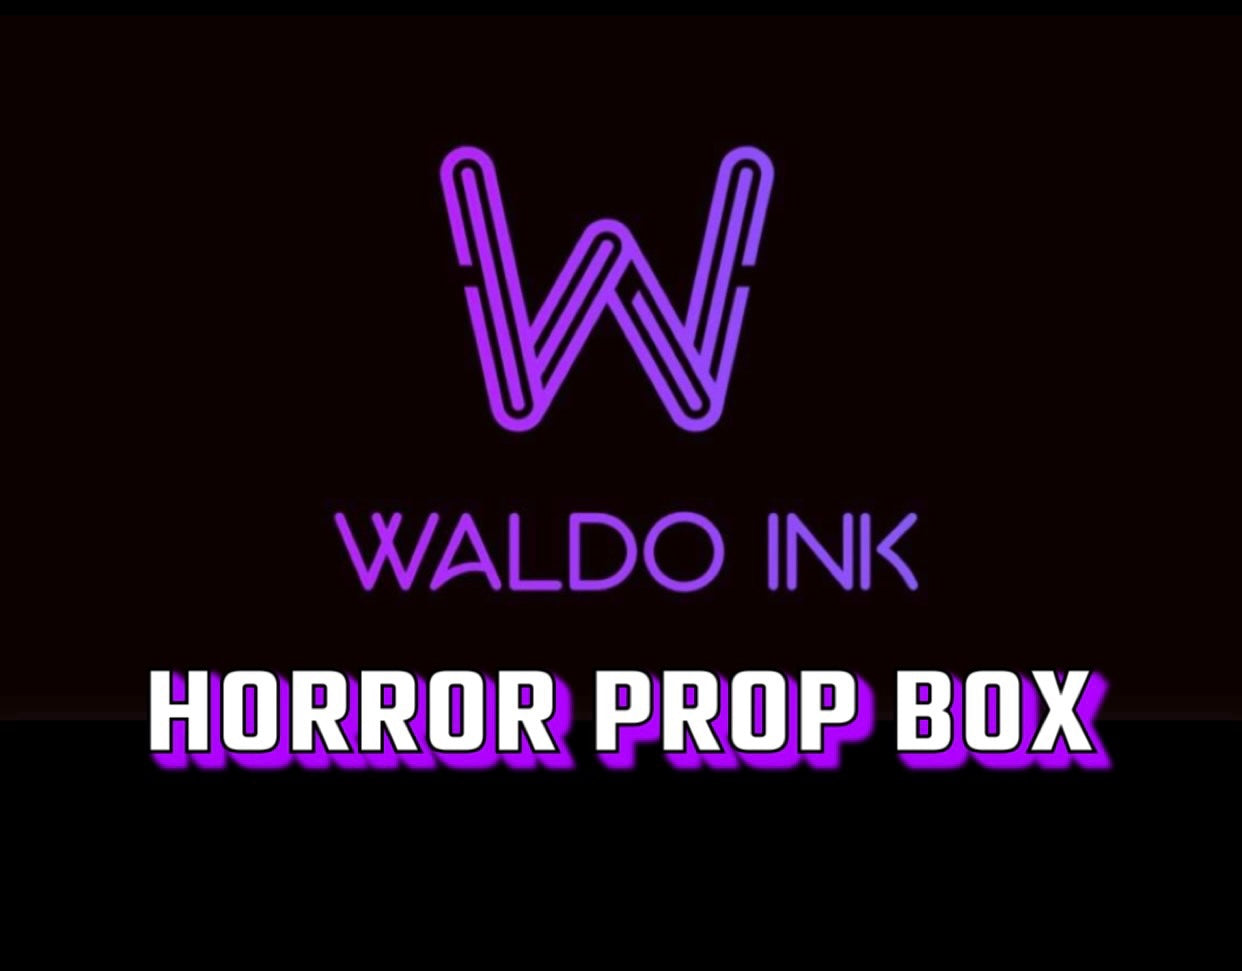 Horror Prop and Photo Stock Box